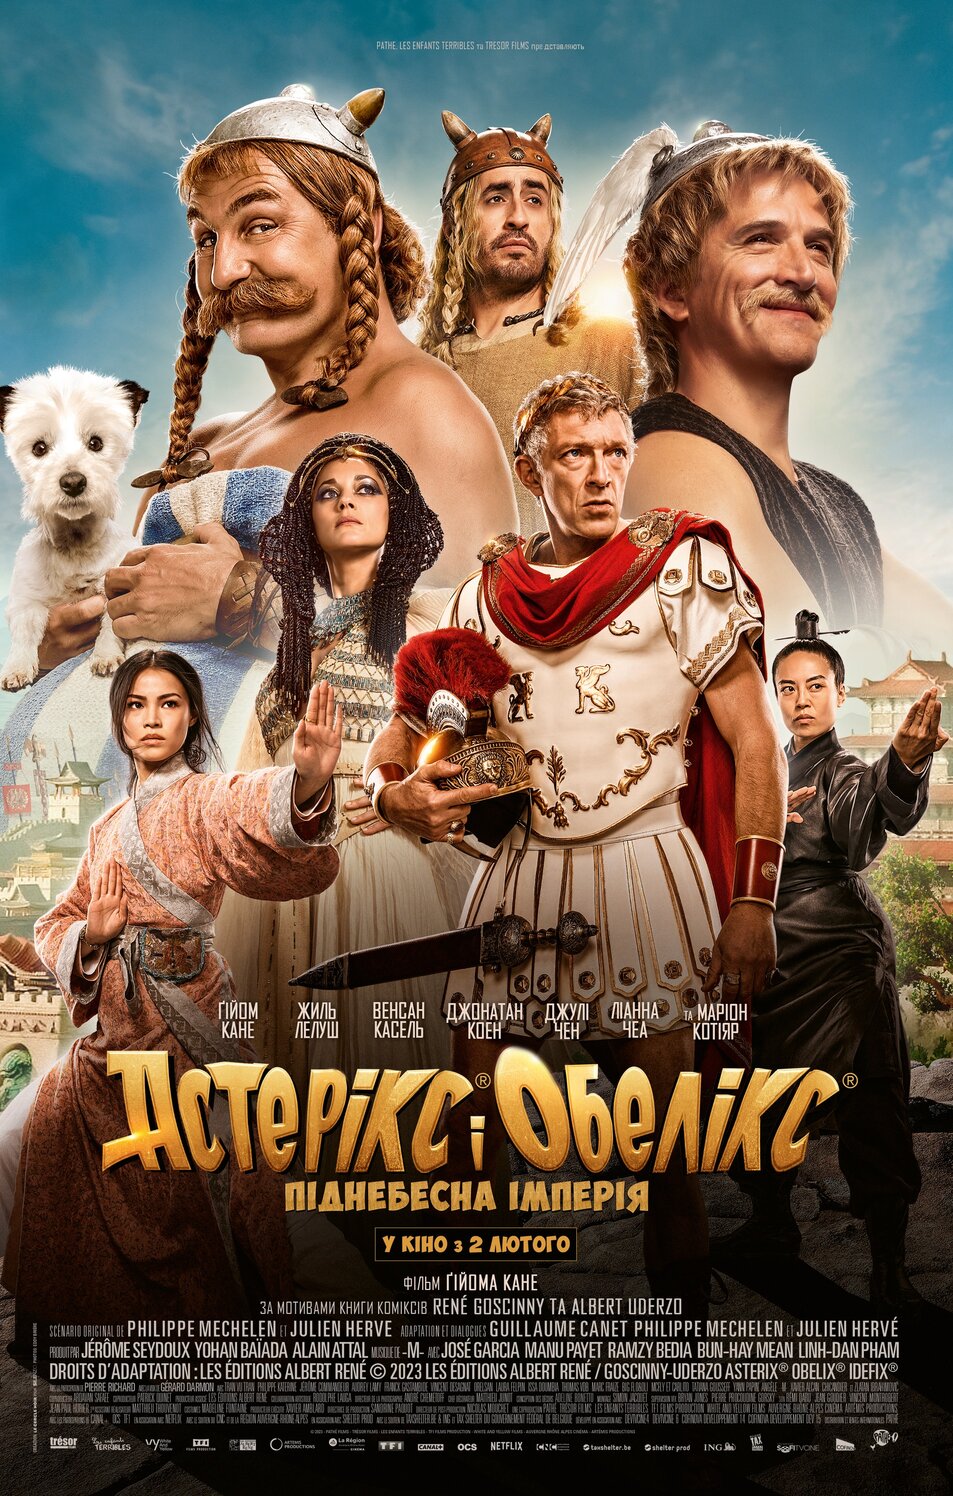 Asterix & Obelix: The Middle Kingdom 2023 Tamil Dubbed Adventure Movie Online